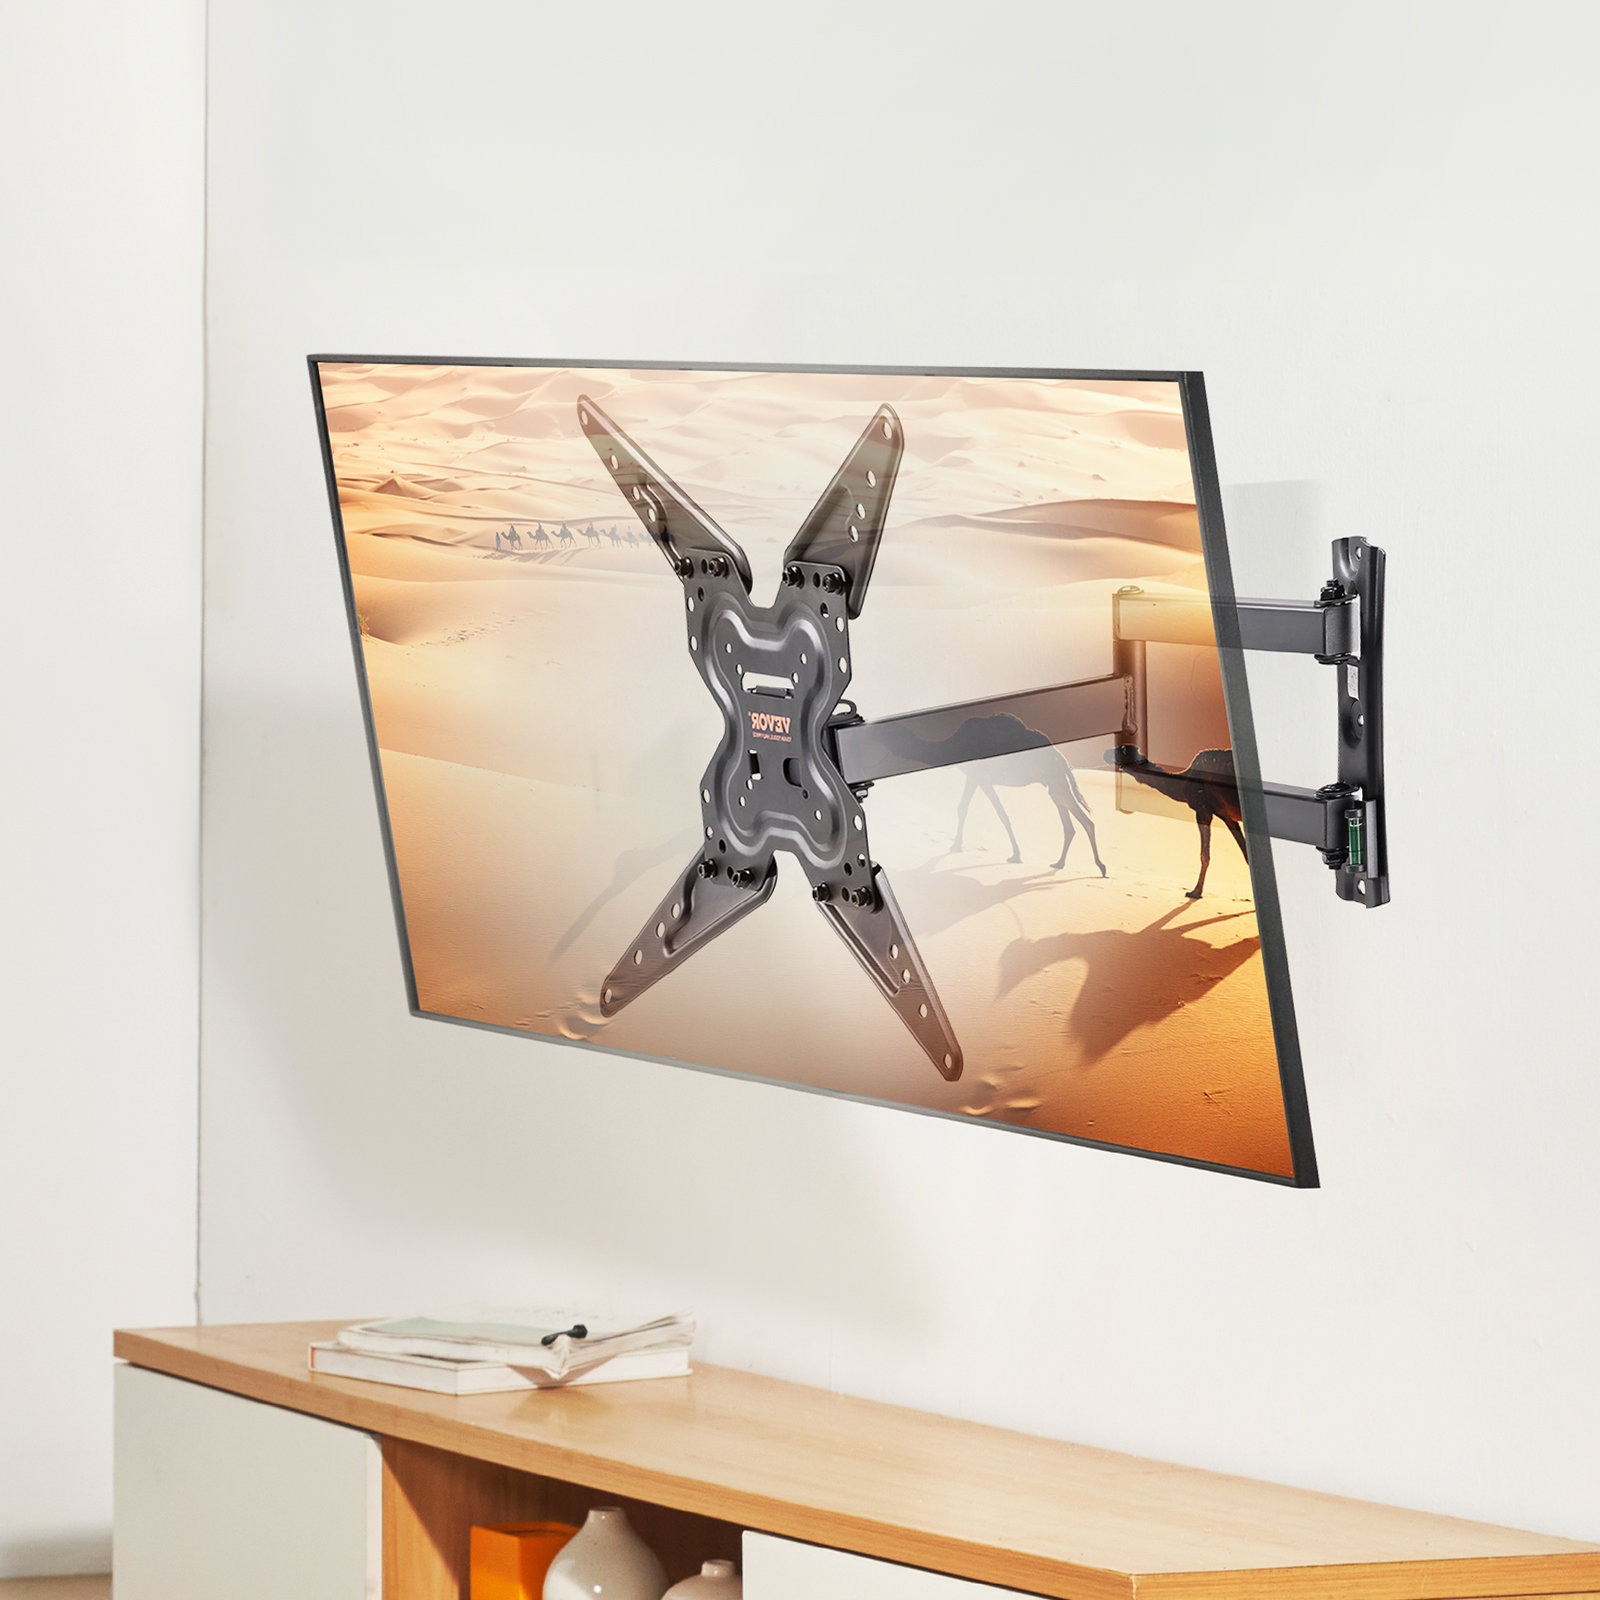 Mount-it! Tv Wall Mount Monitor Bracket With Full Motion